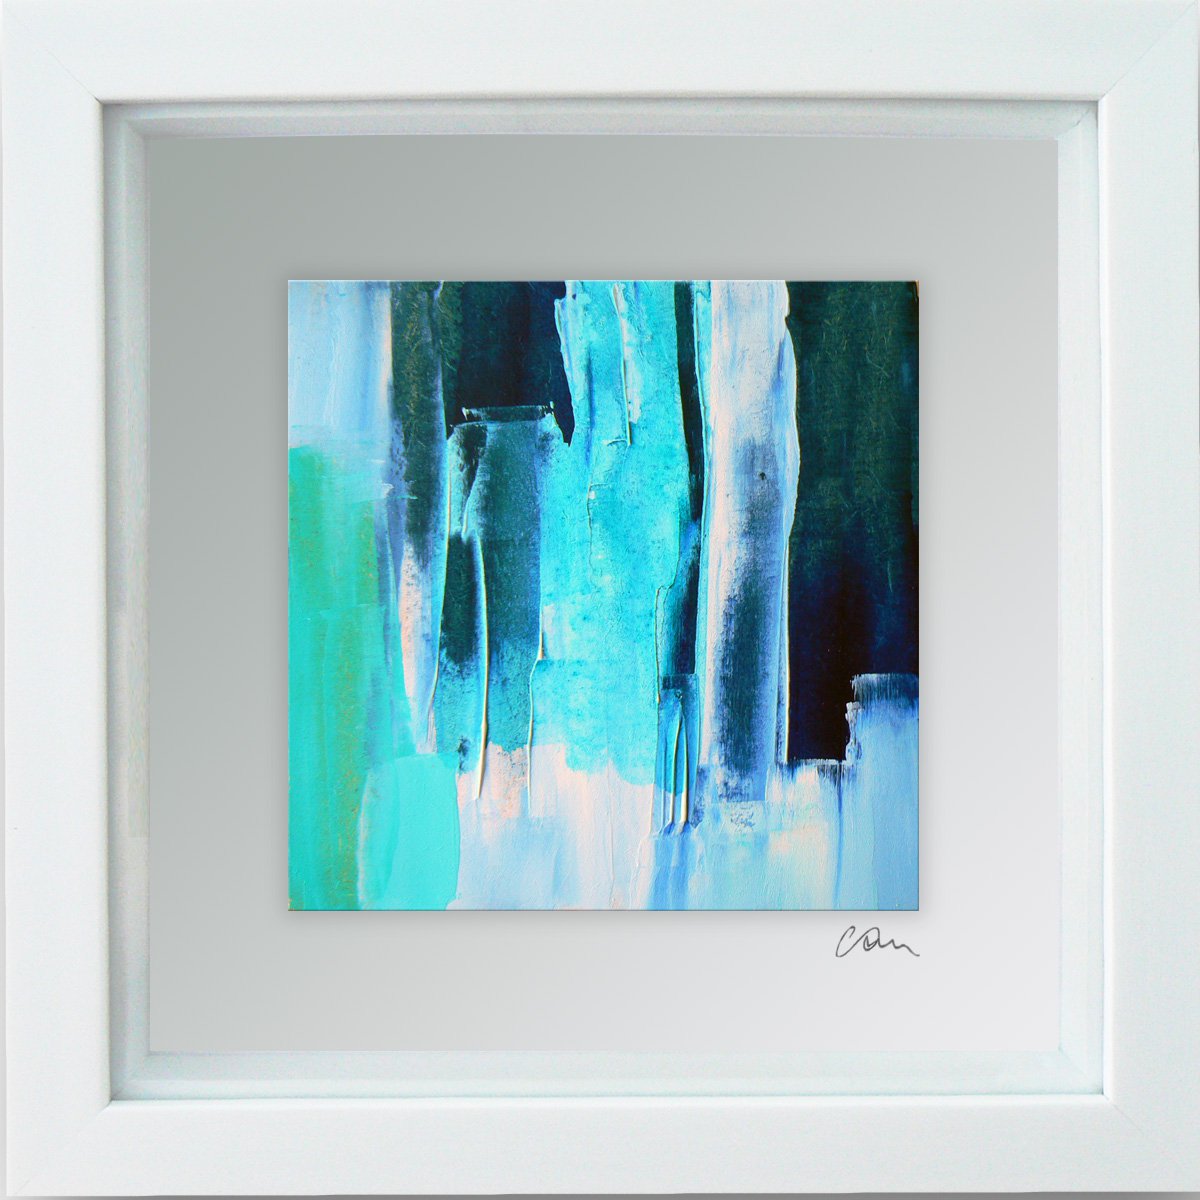 Framed ready to hang original abstract - Deep water #8 by Carolynne Coulson